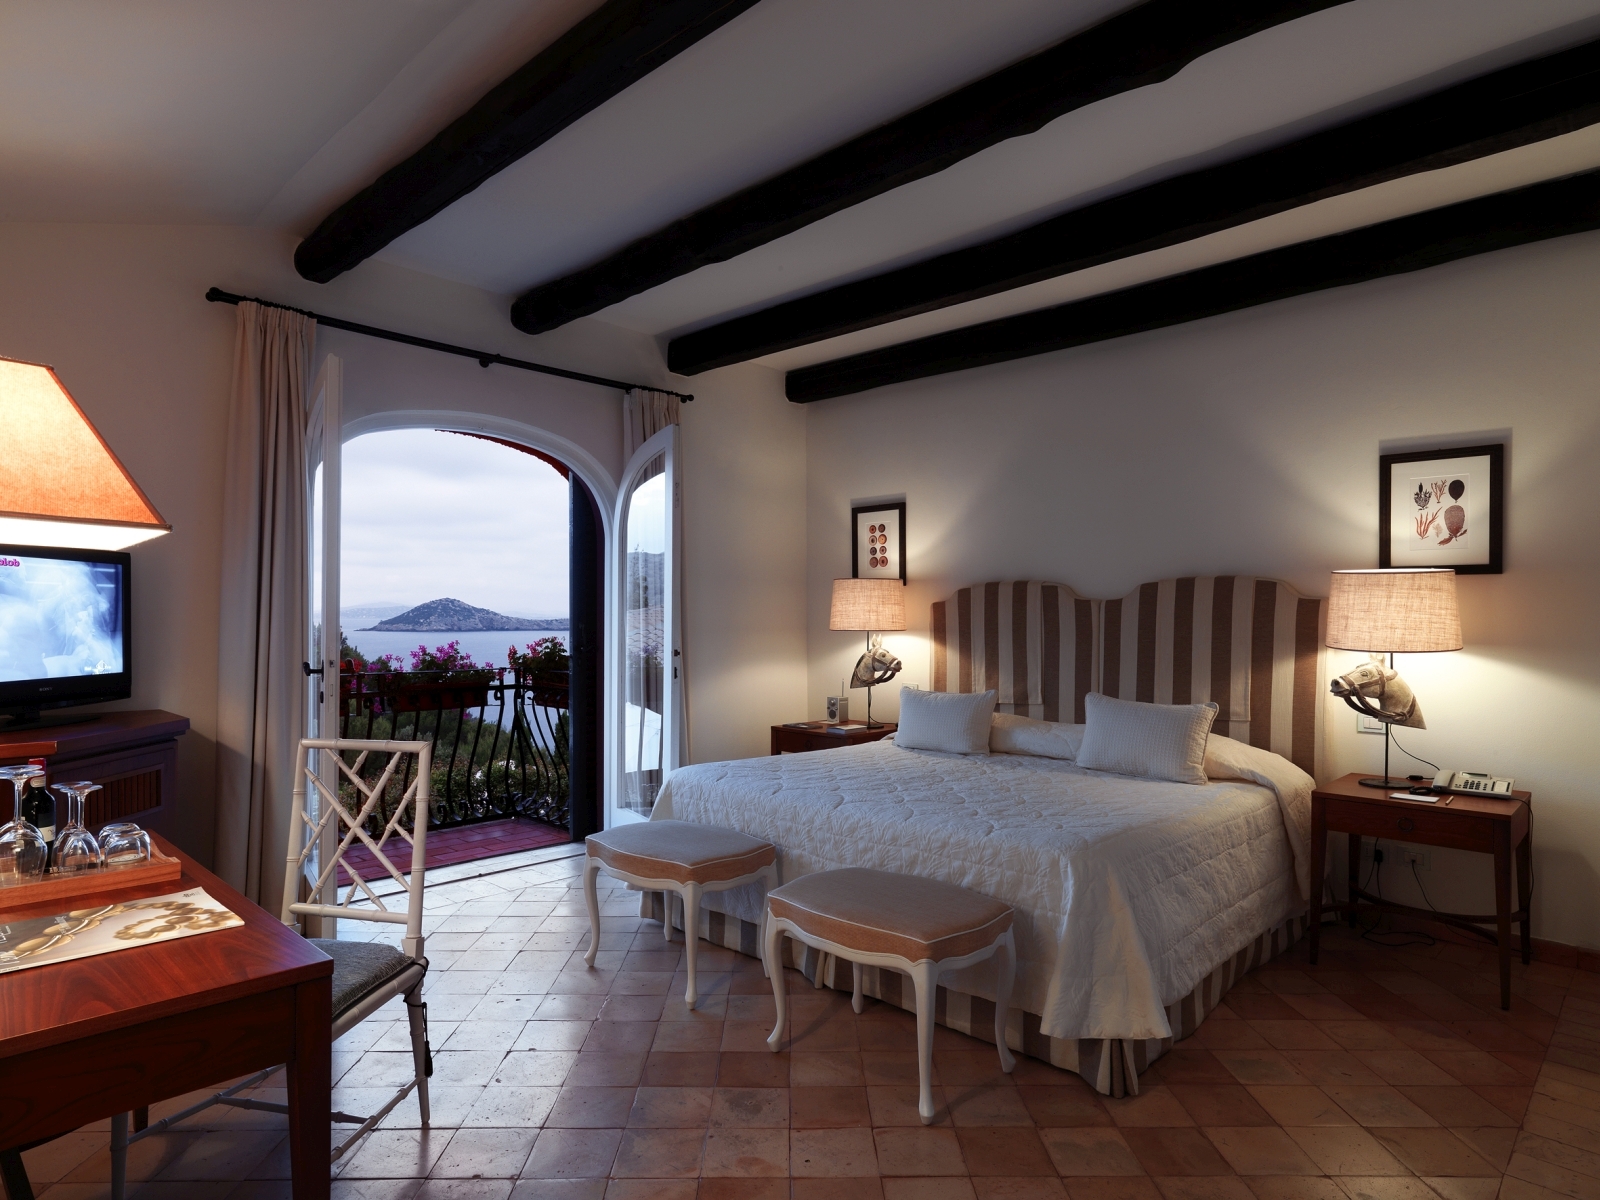 Room with view over ocean at Il Pellicano